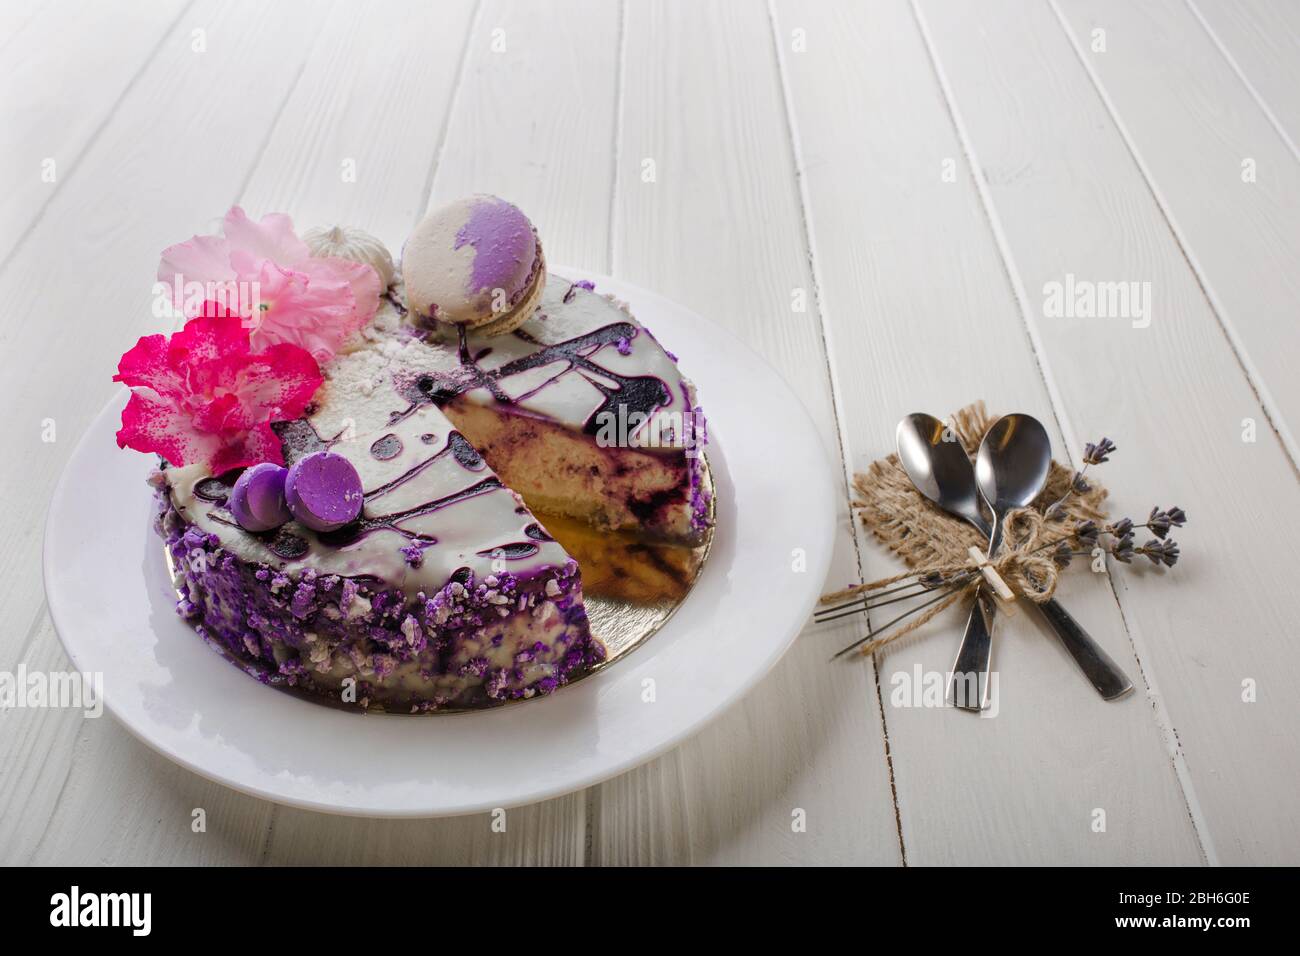 Homemade blueberry cheesecake decorated flower and macaroon on wooden white table background. Top view. Stock Photo